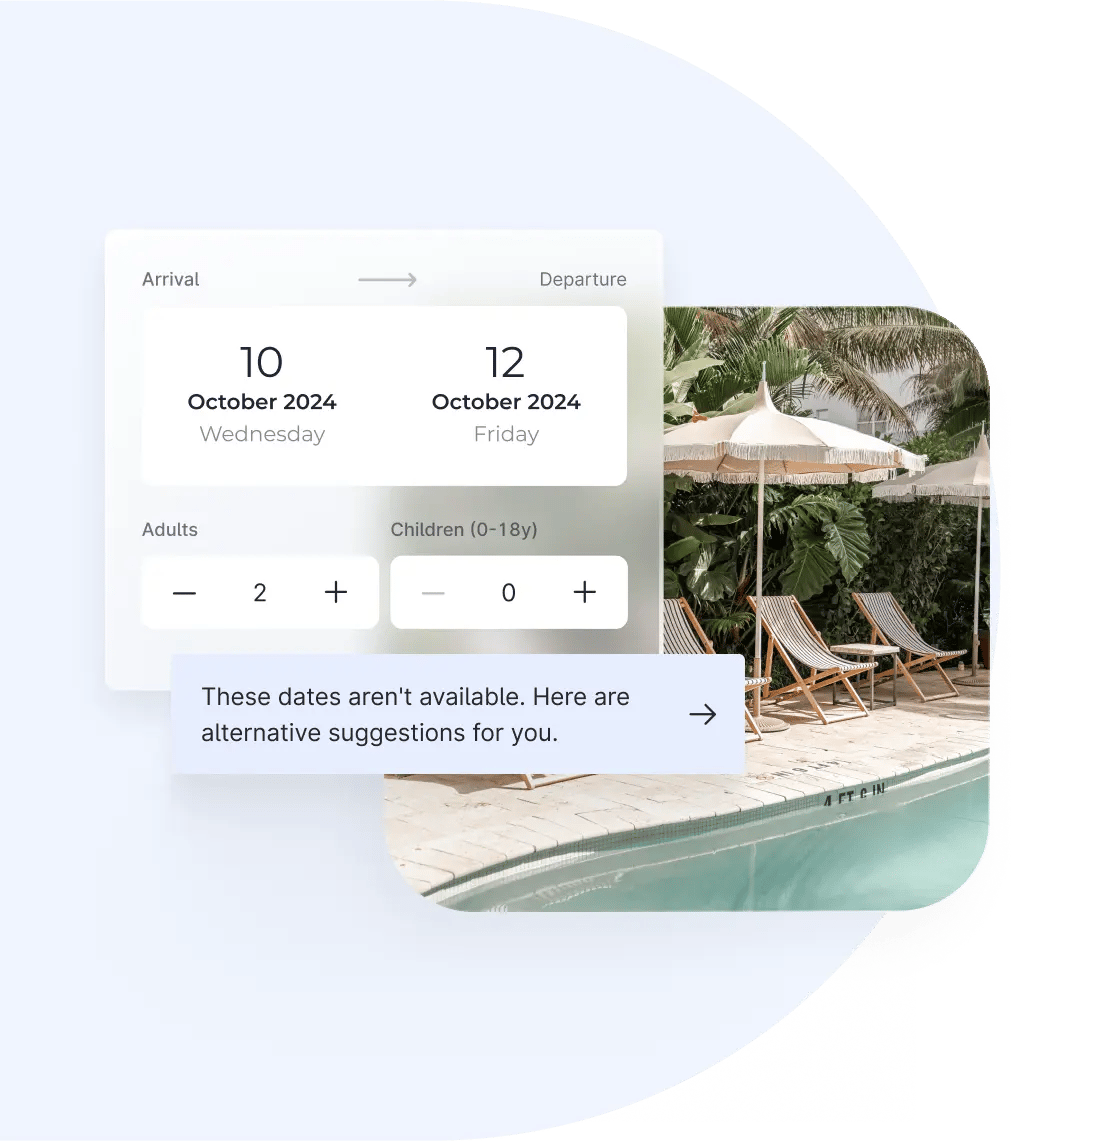 Intuitive booking engine